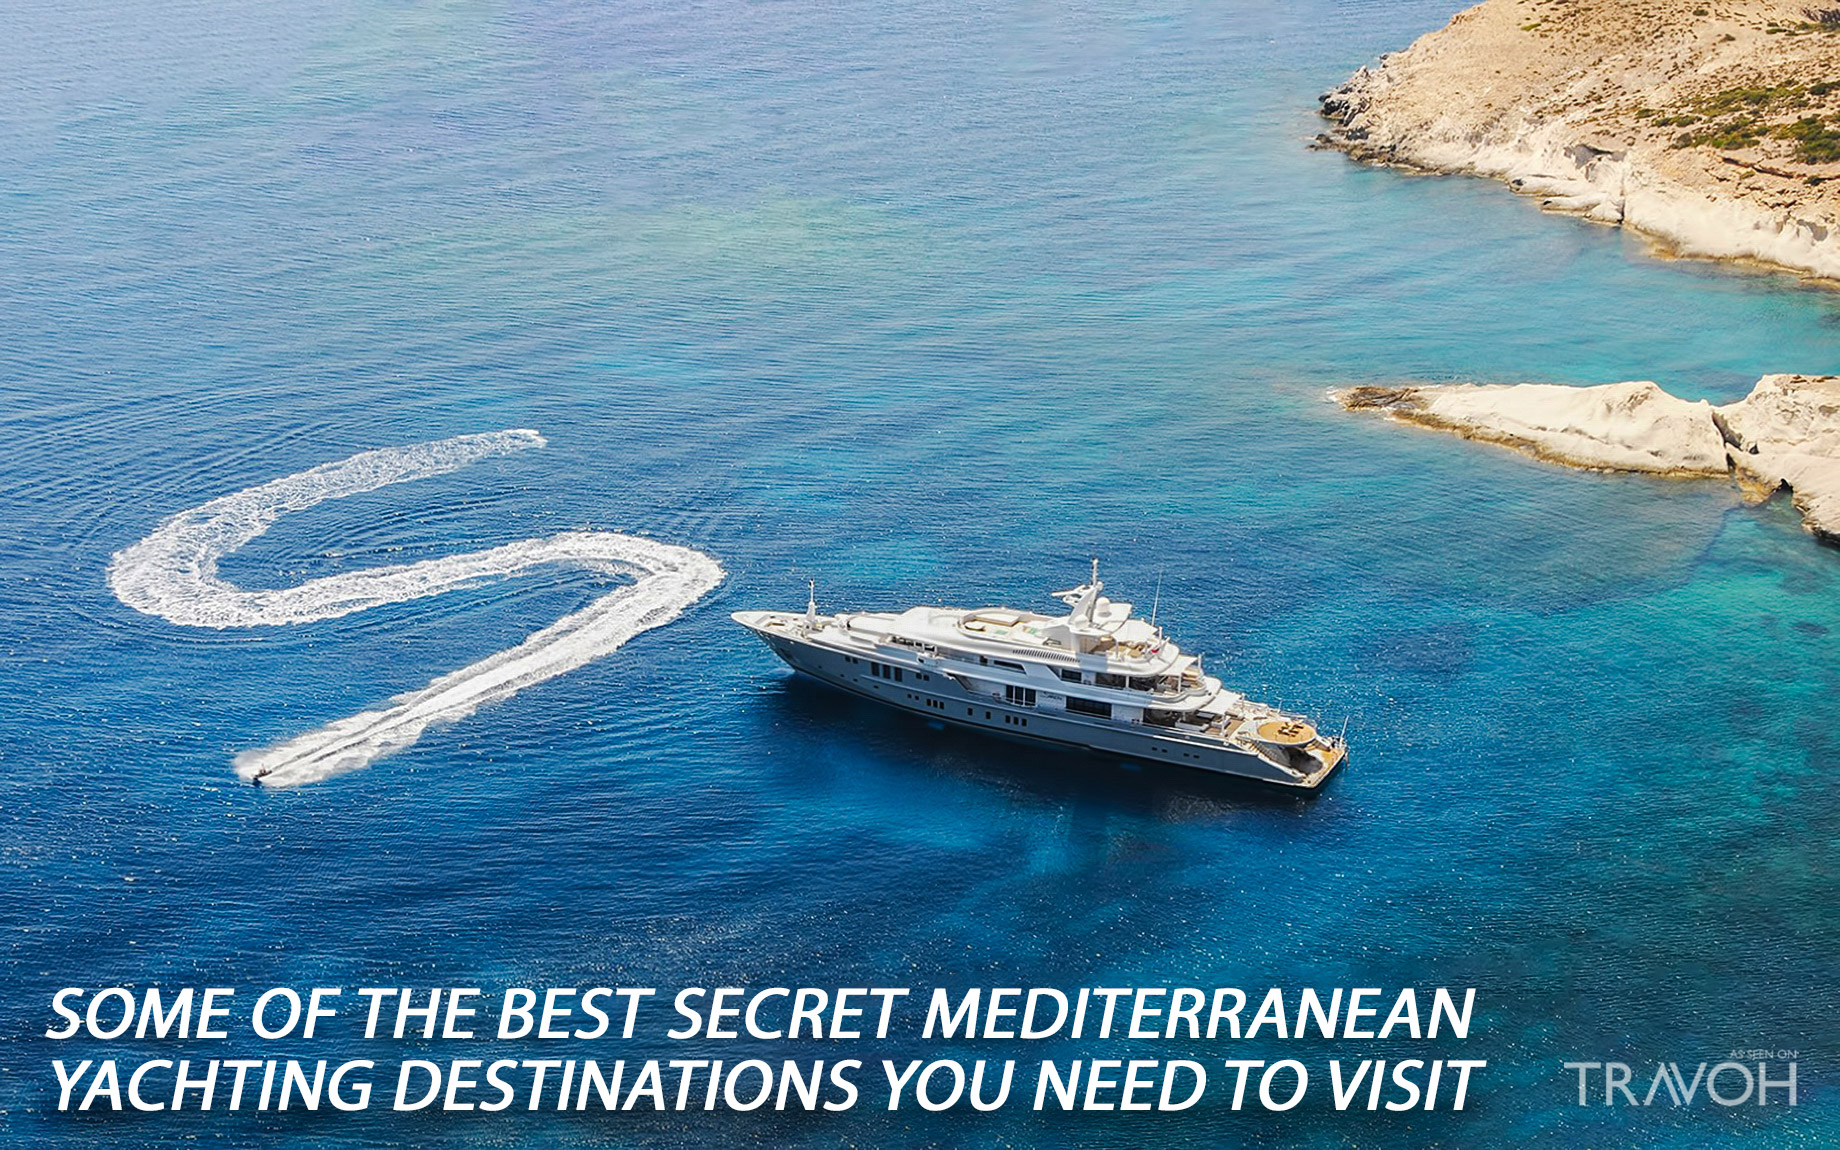 Some of the Best Secret Mediterranean Yachting Destinations You Need to Visit